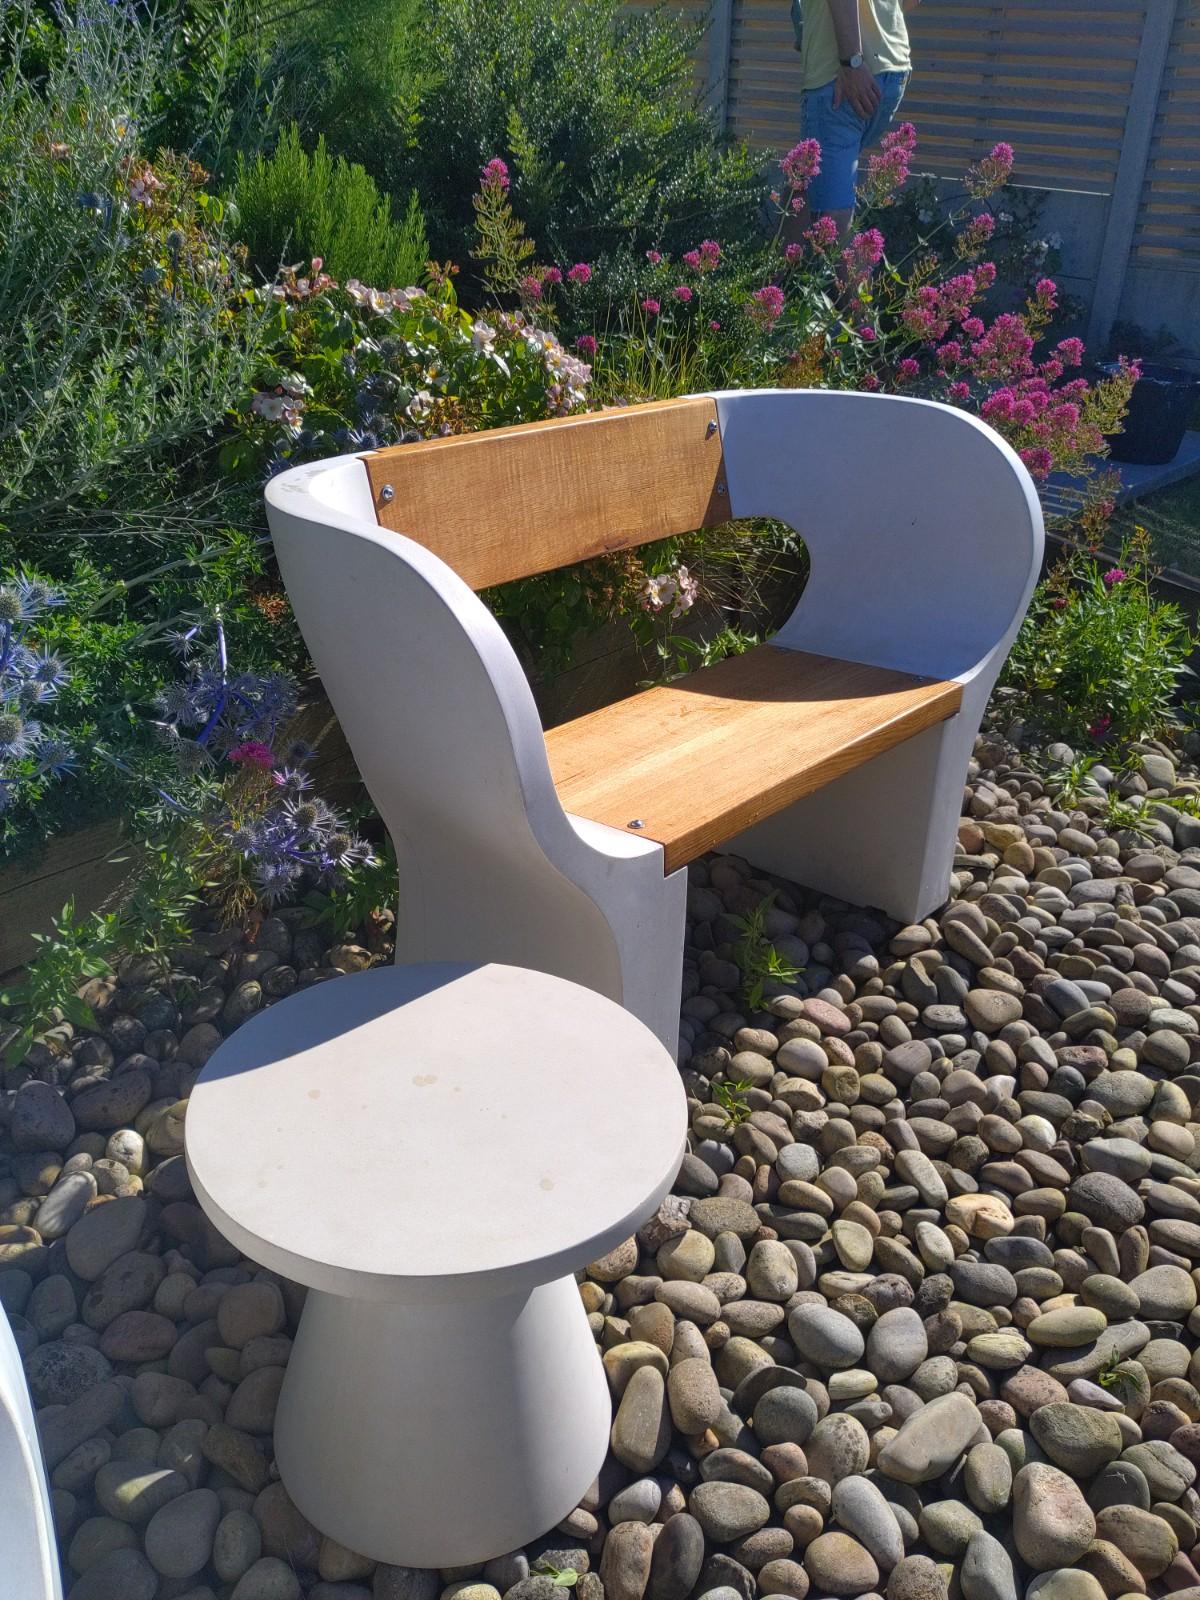 This striking sculptural concrete outdoor bench is handcrafted in the UK and is the perfect for every garden, balcony or roof terrace. It is made out of glass-reinforced concrete and European oak.

The Snug bench available in three widths, 120cm,